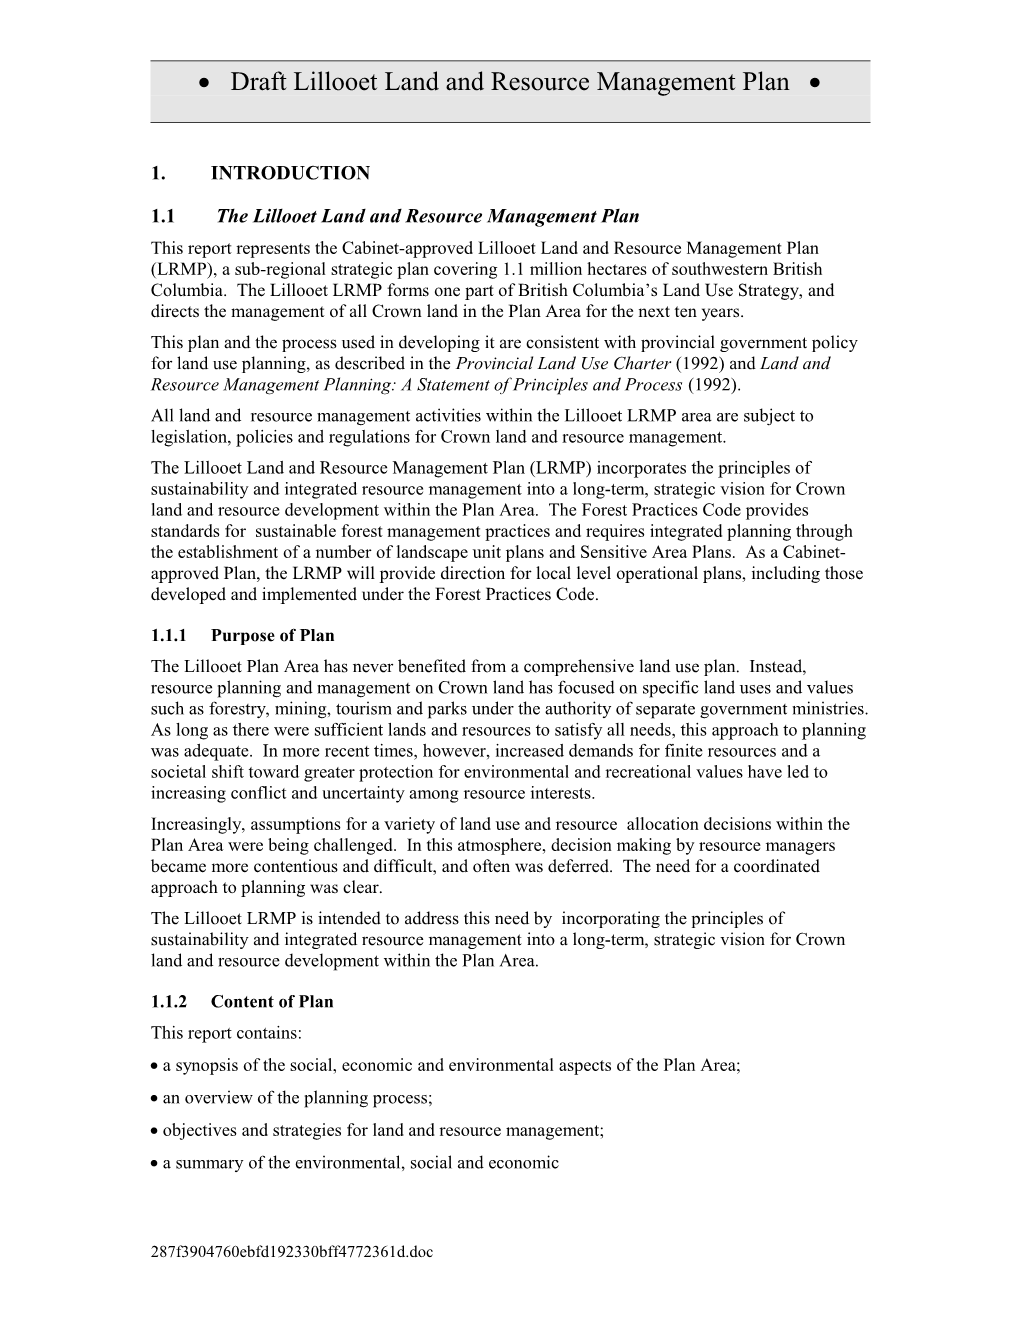 1.1 the Lillooet Land and Resource Management Plan